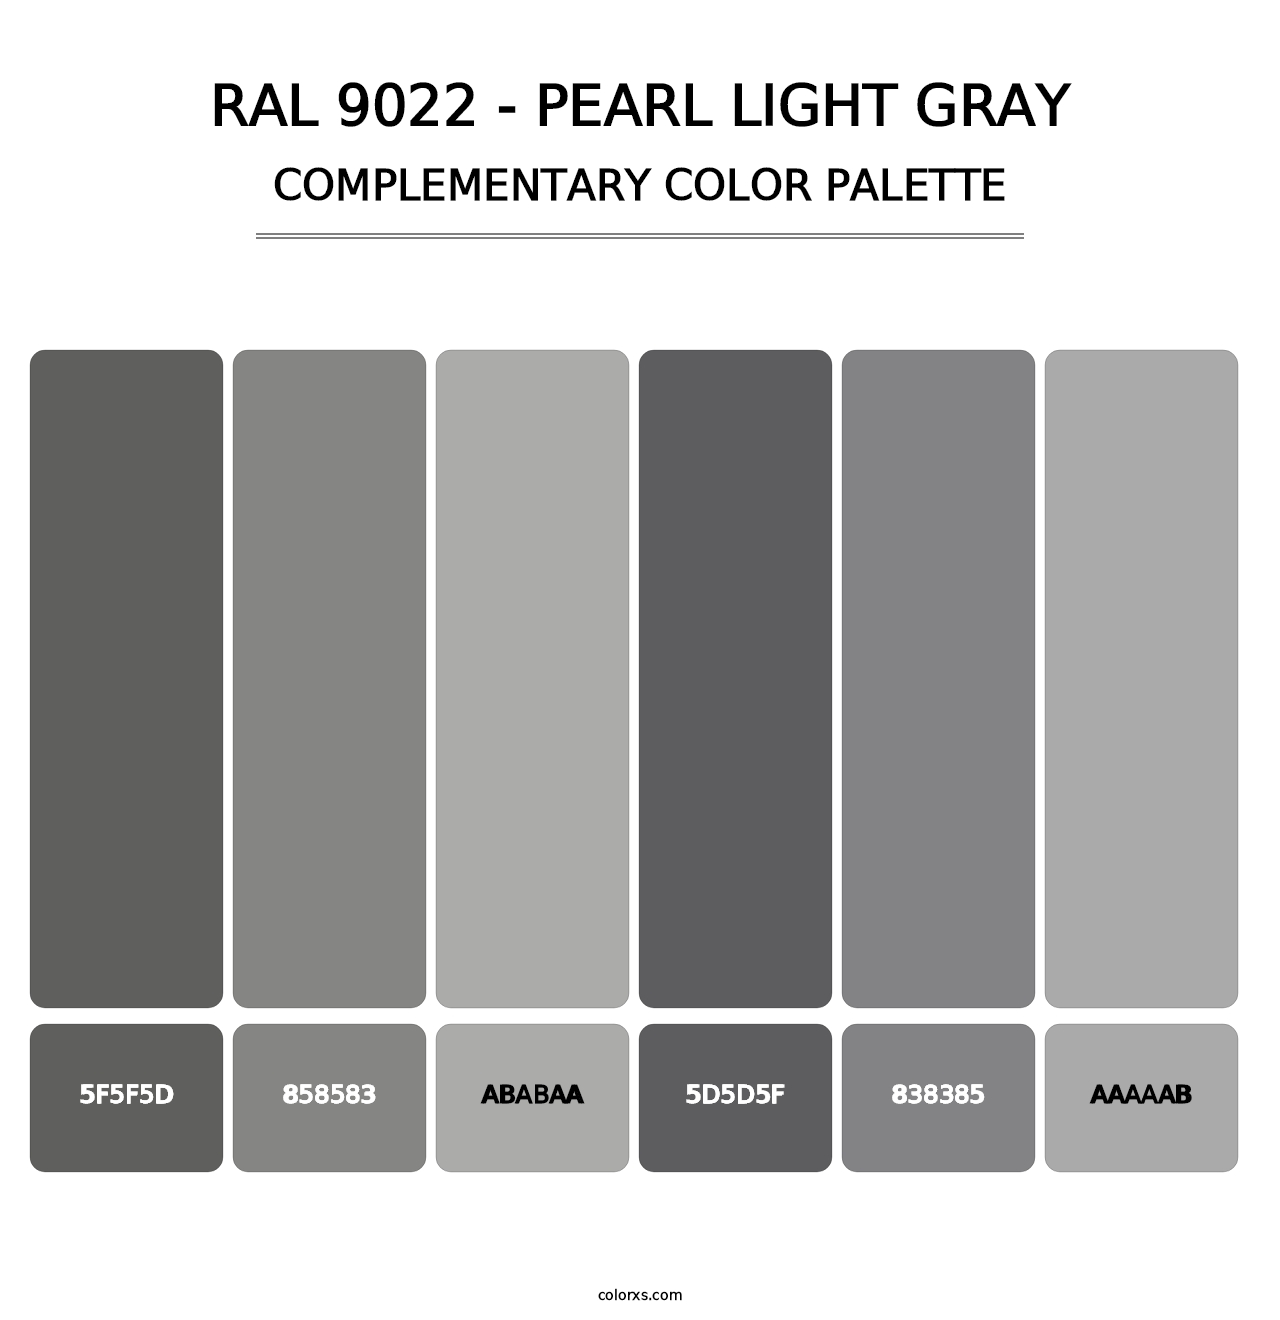 RAL 9022 - Pearl Light Gray - Complementary Color Palette